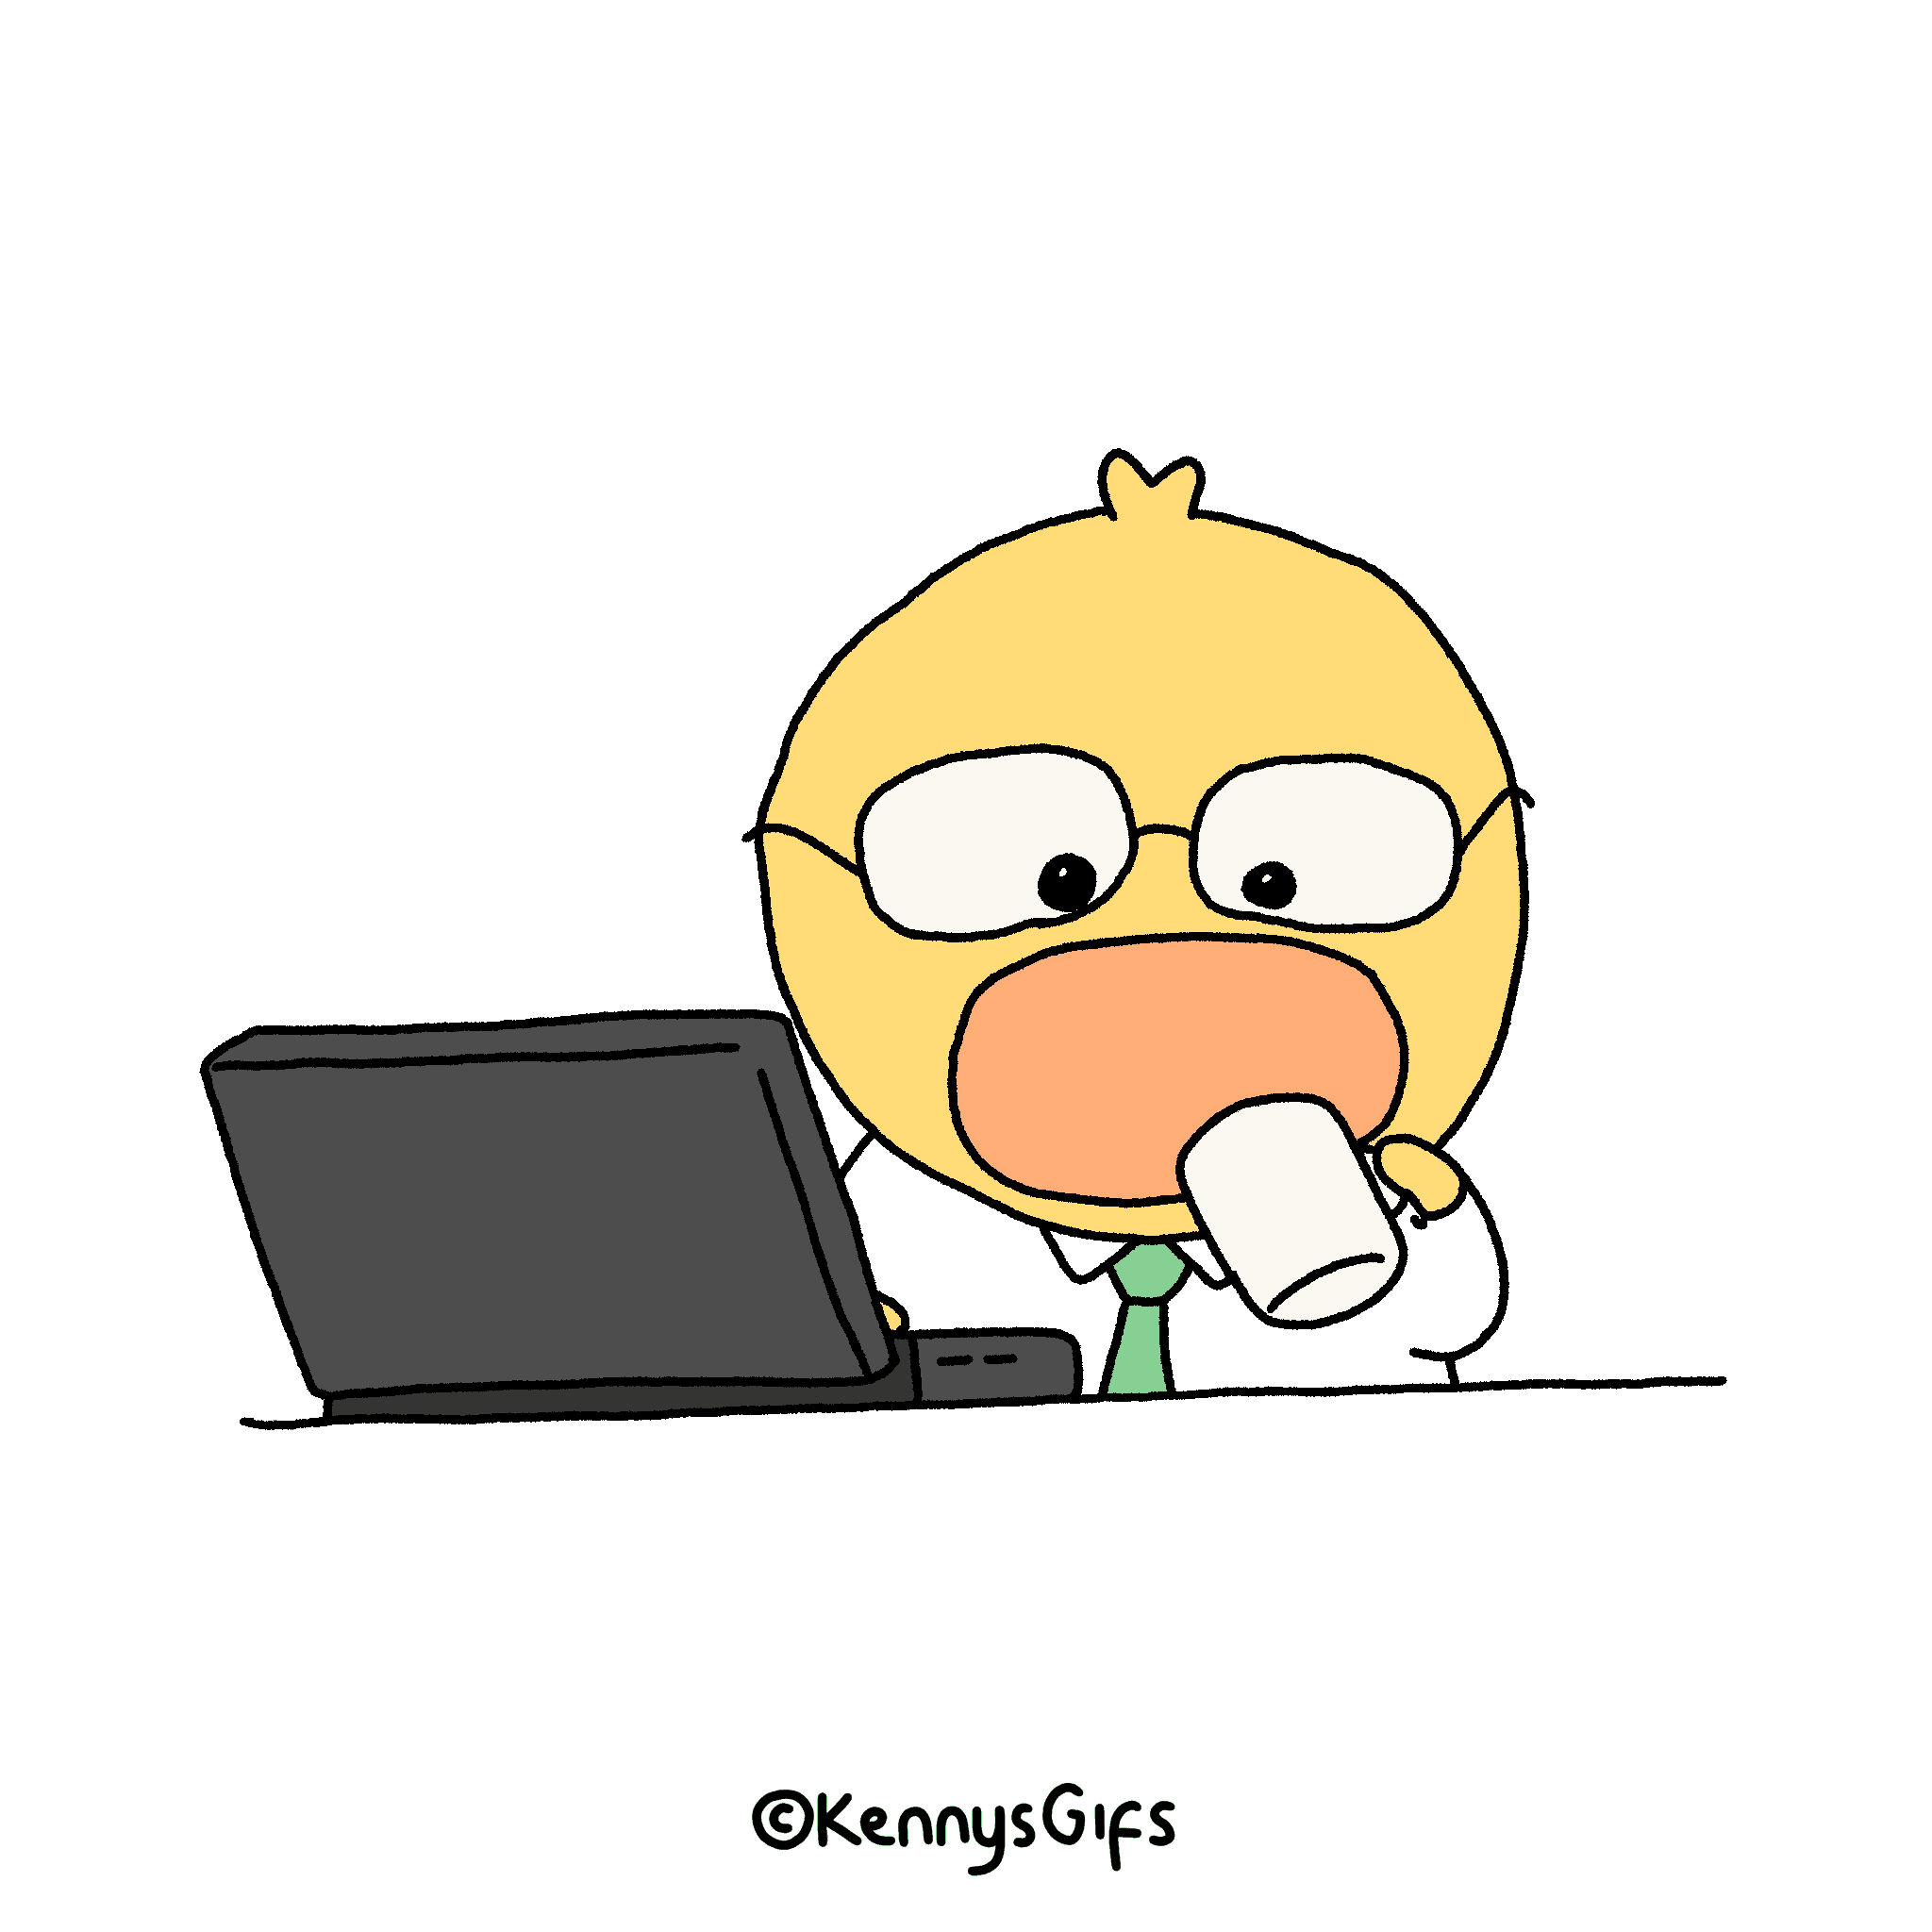 Duck at work